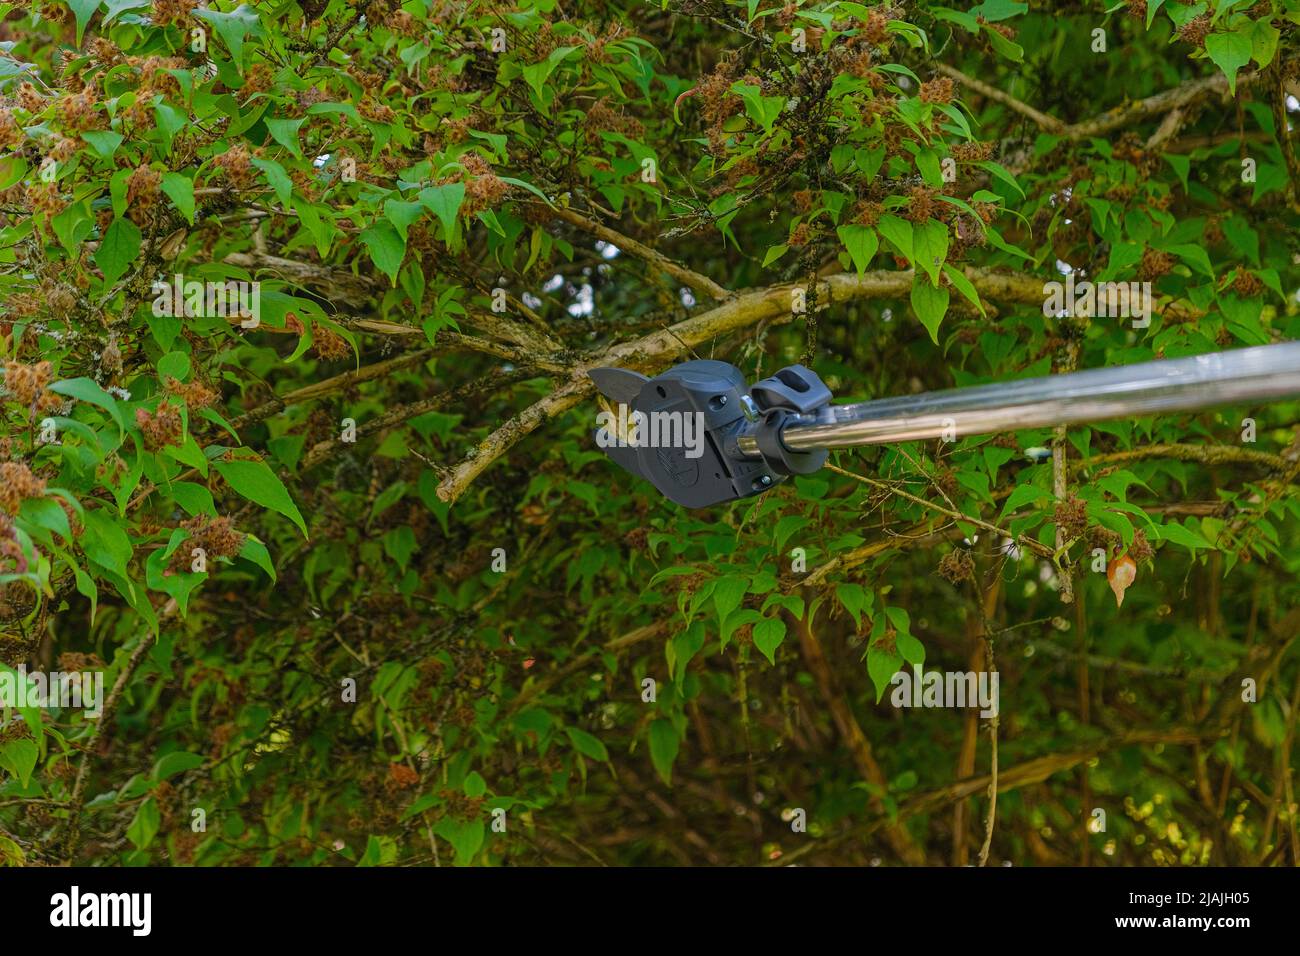 Pruning tall trees in the garden.Telescopic garden shears cut branches .telescopic pruner for pruning branches. Pruning Tool.Gardening and farming Stock Photo